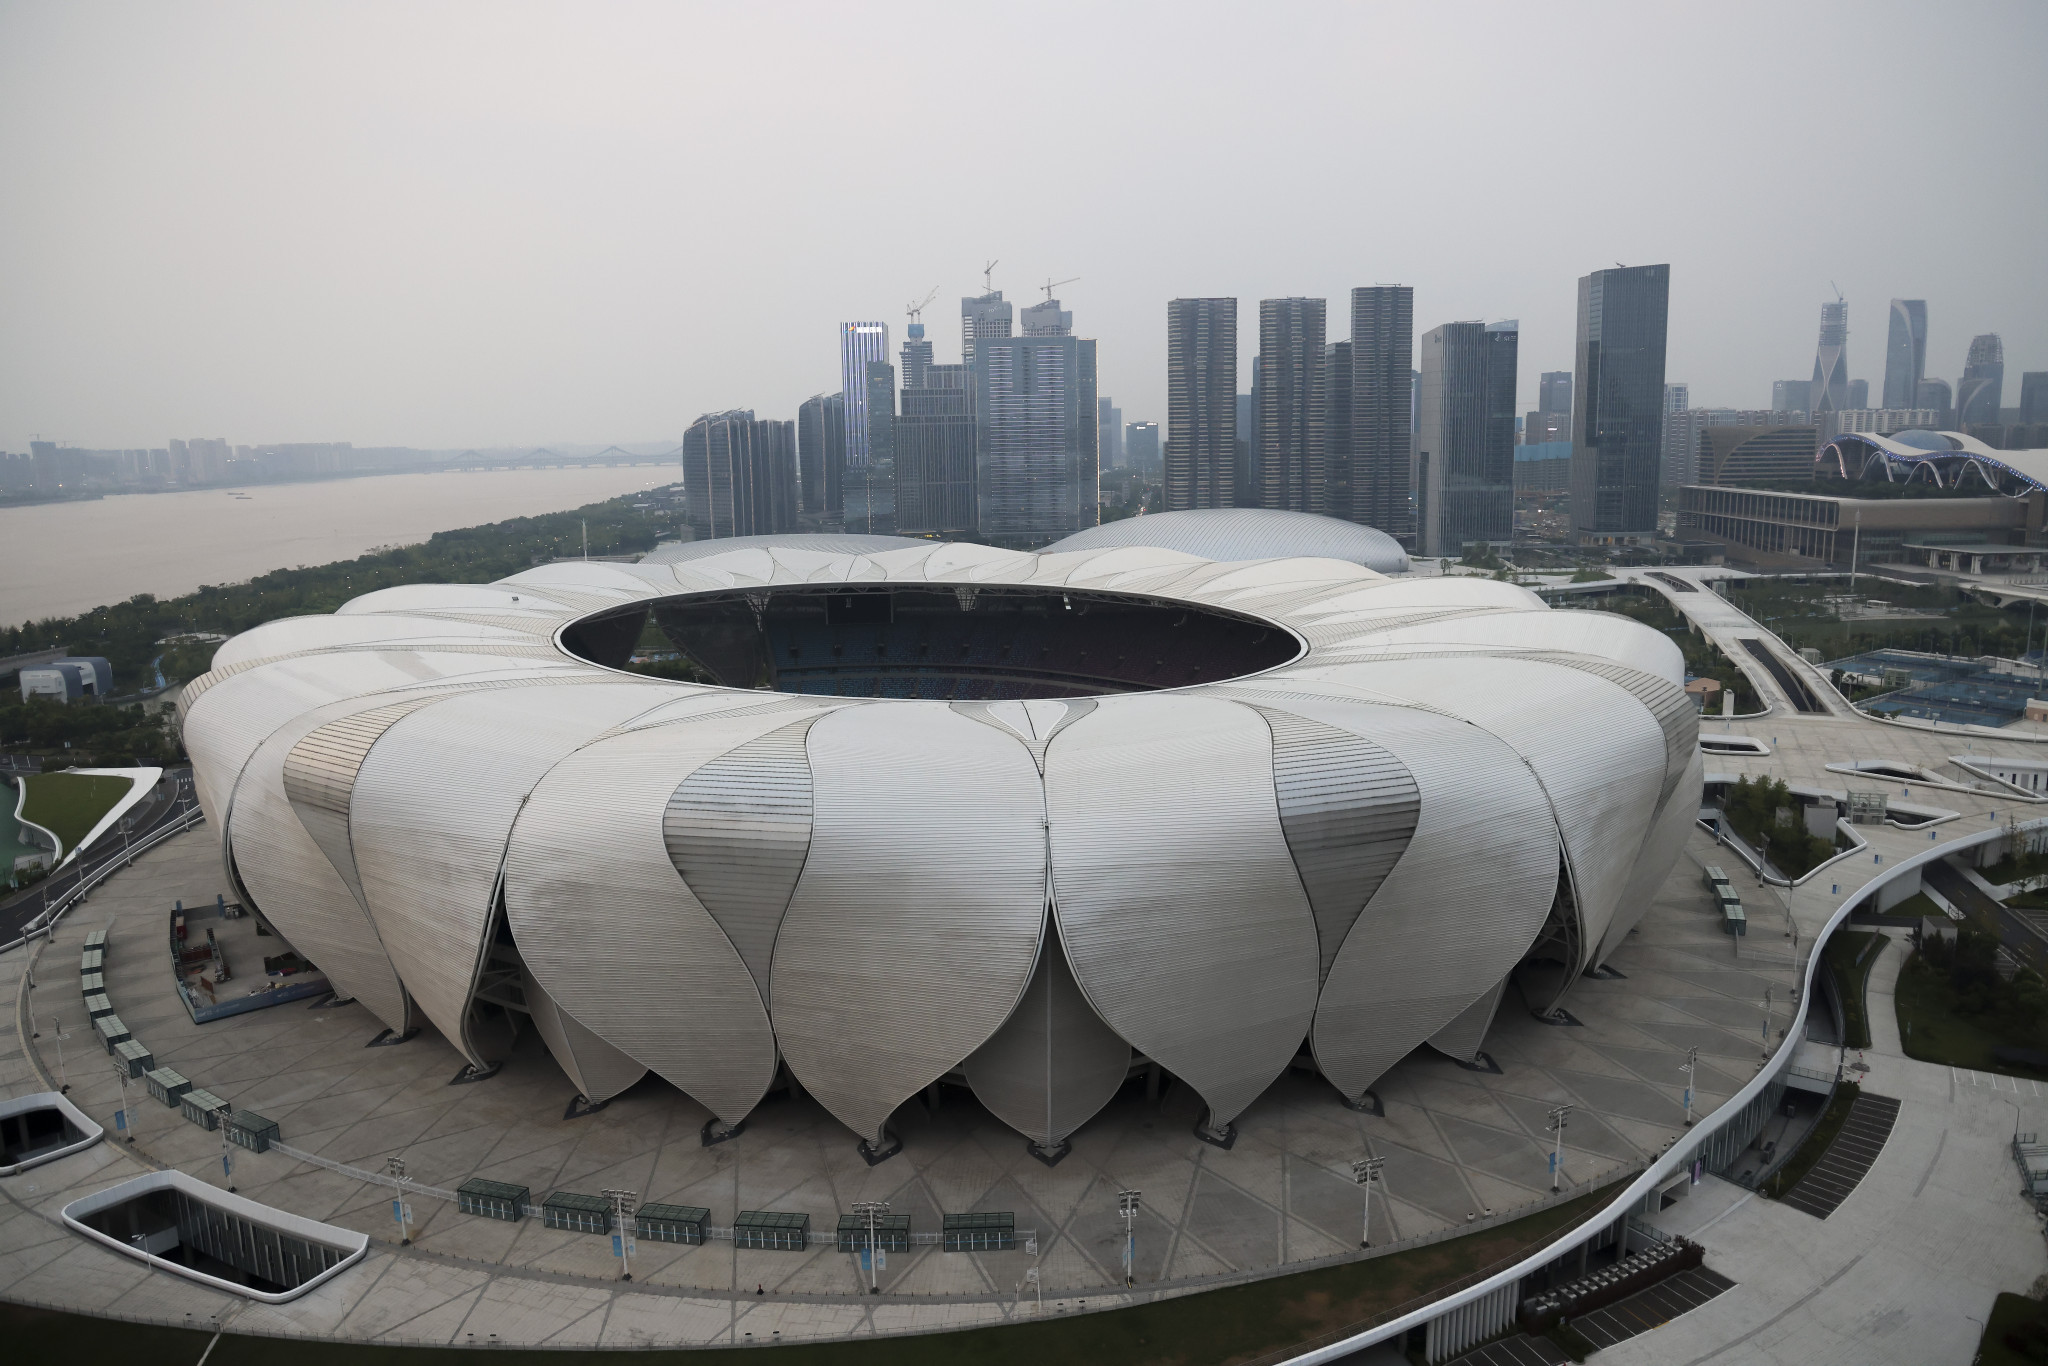 The 54 competition venues for Hangzhou 2022 and 30 training venues have been used by more than five million people, according to organisers ©Getty Images